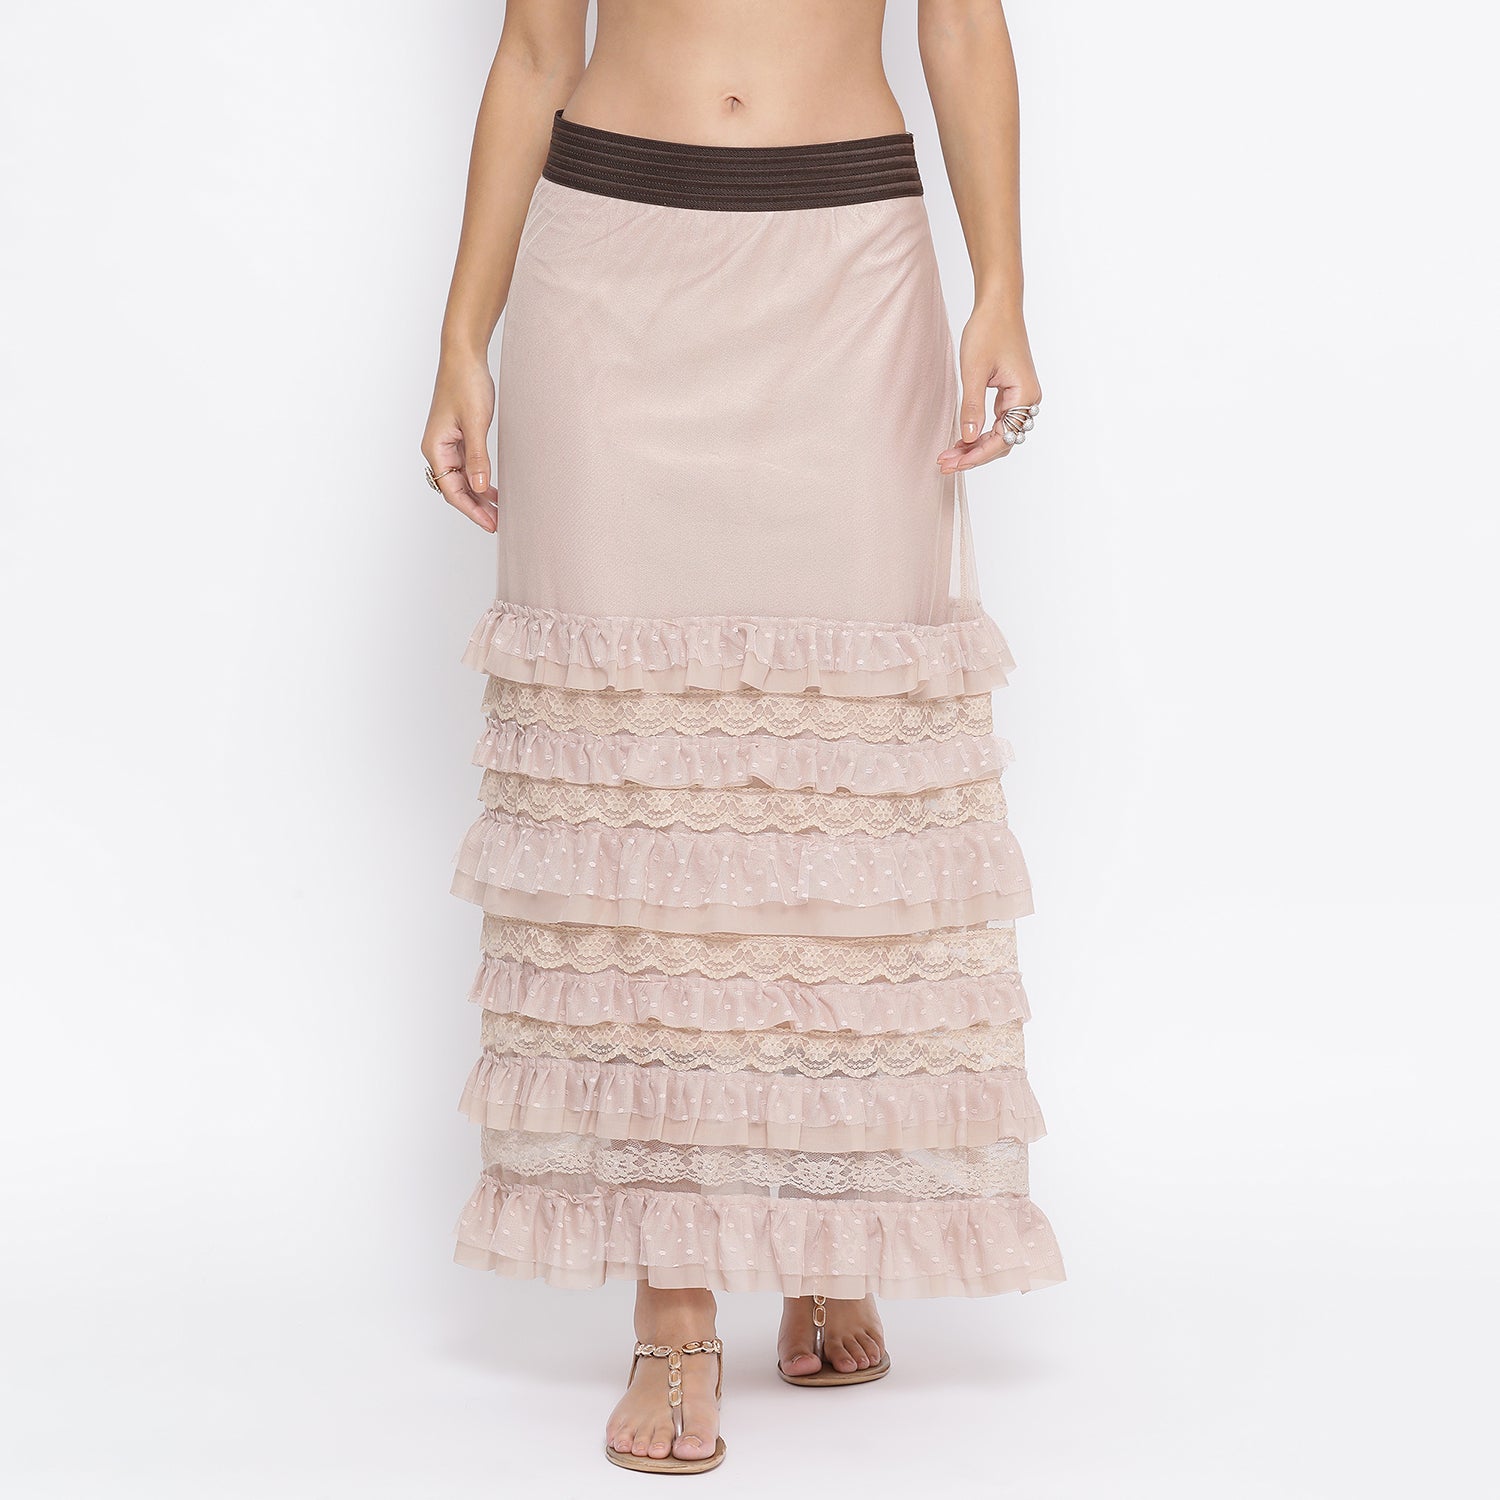 Beige Net Skirt With Brown Elastic And Frills